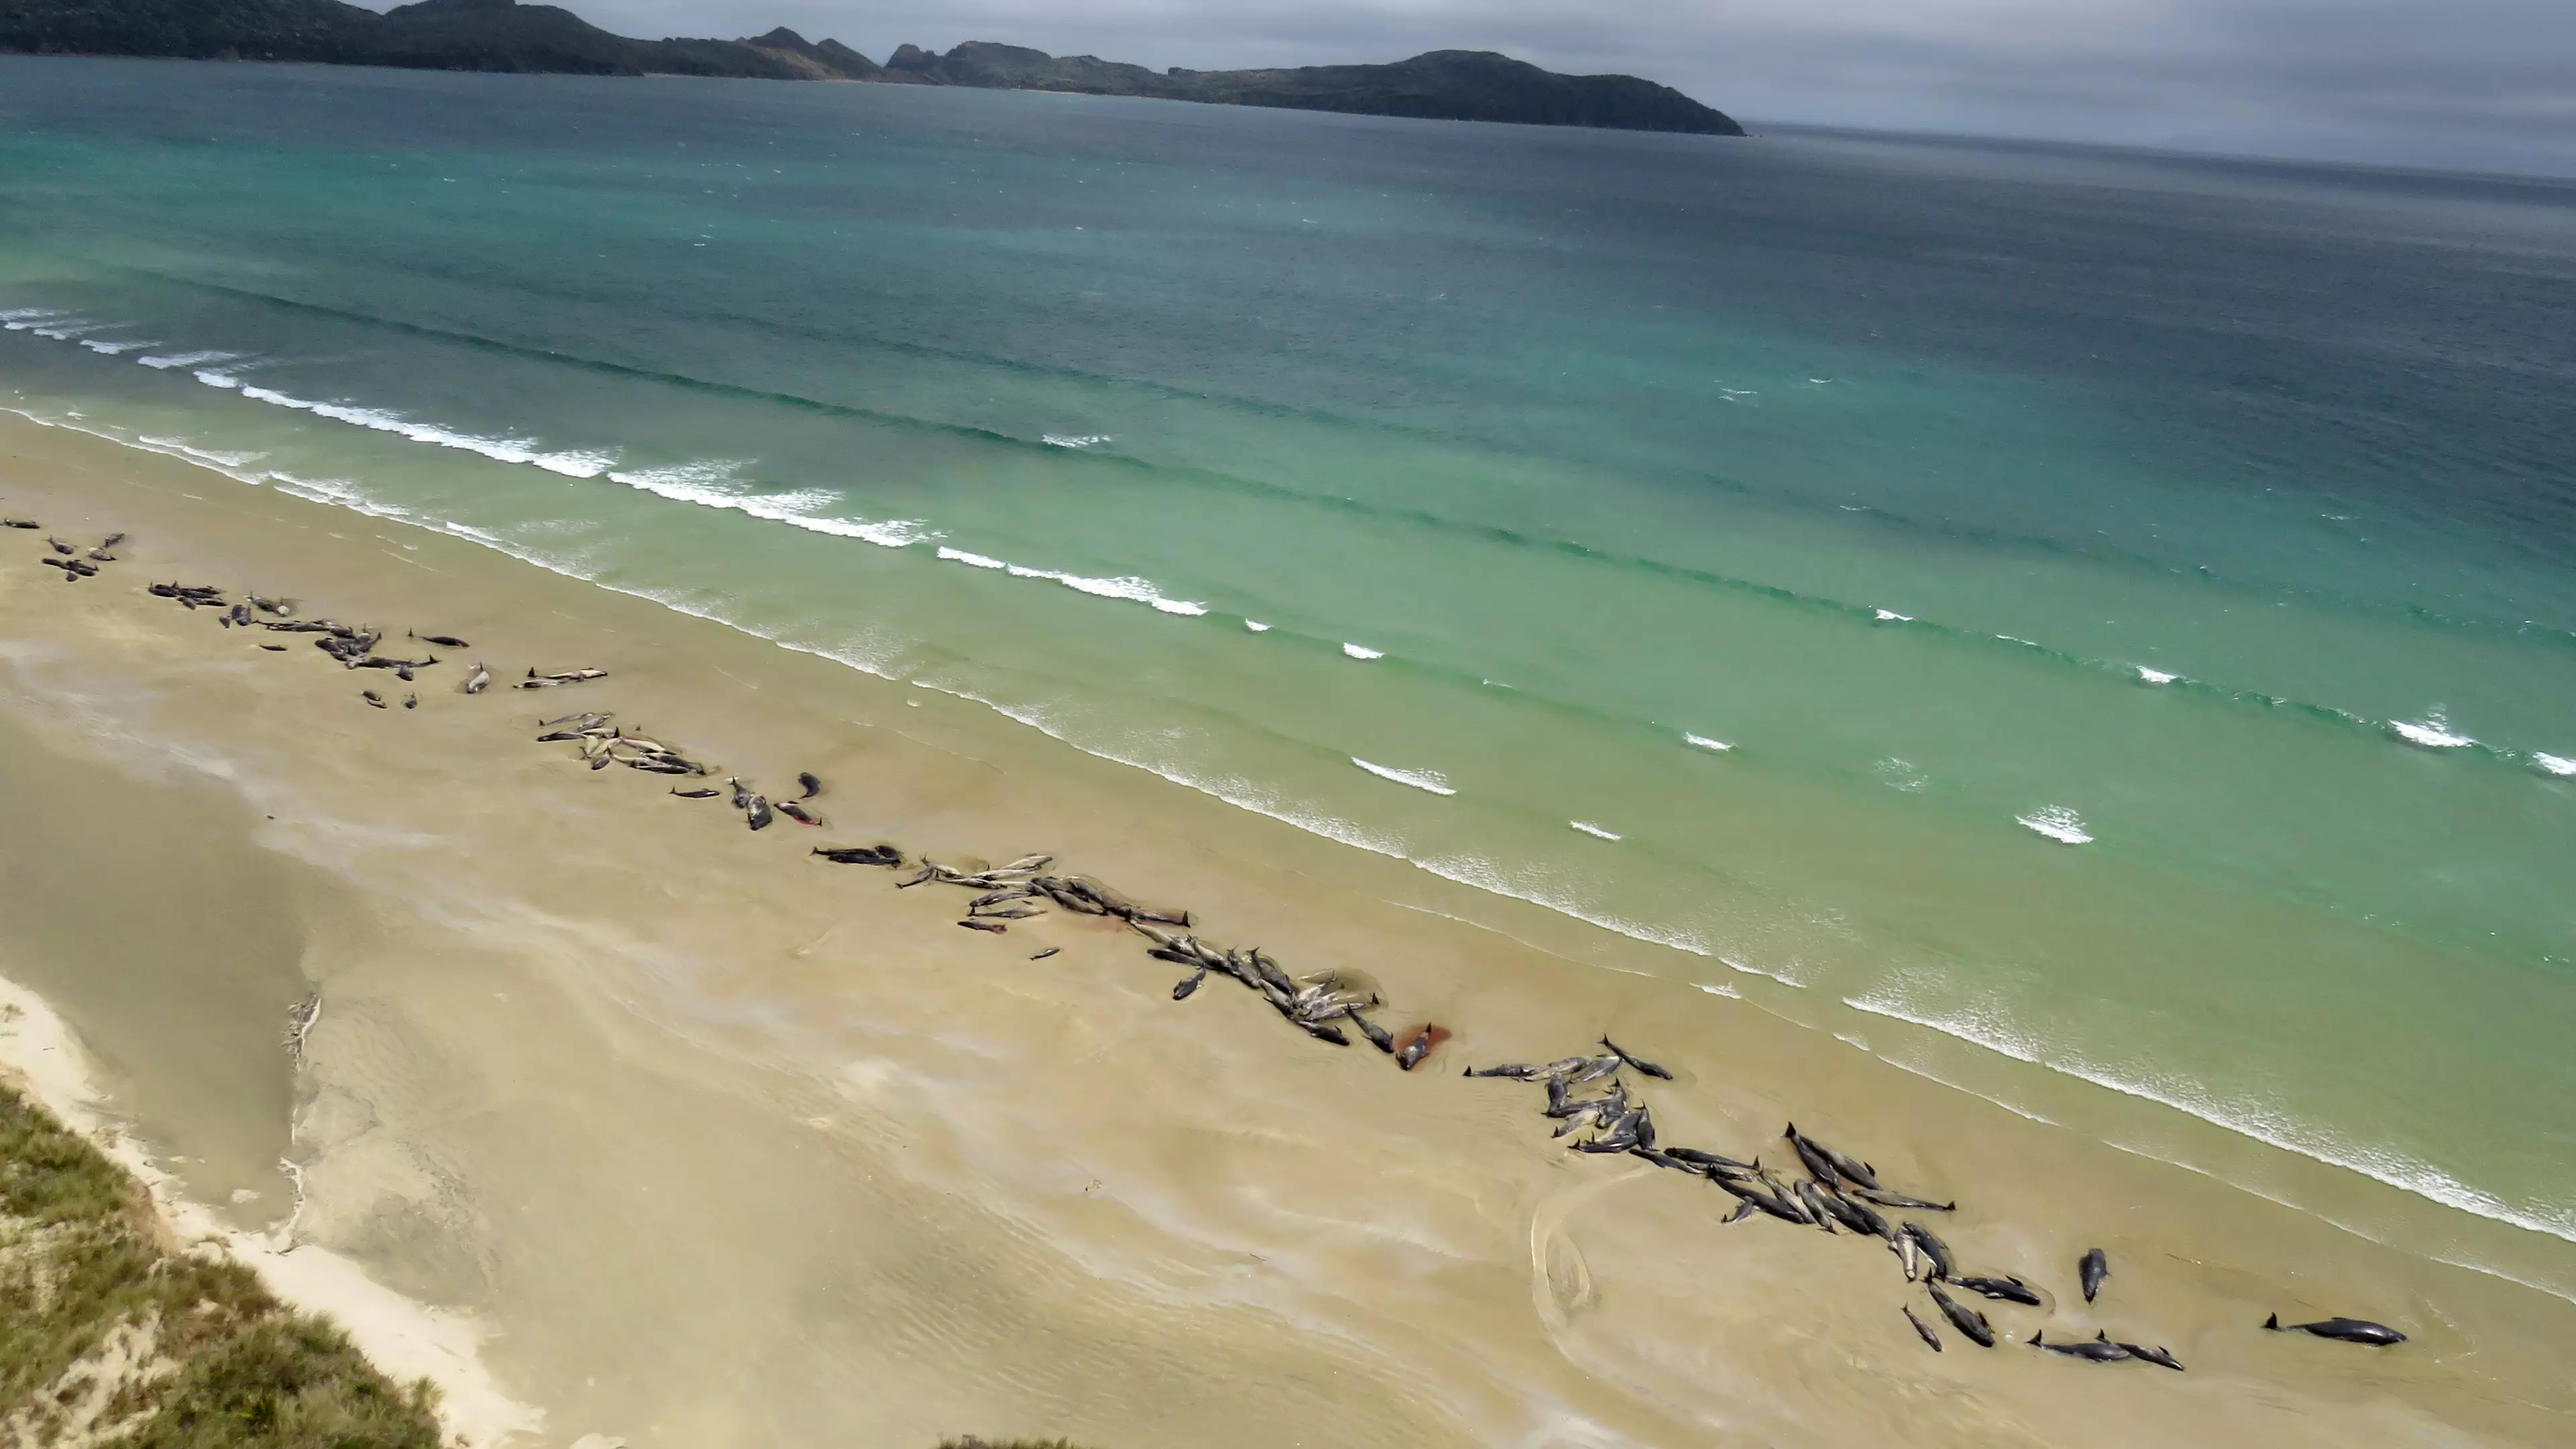 145 Whales Die After Beaching On Remote Beach In New Zealand